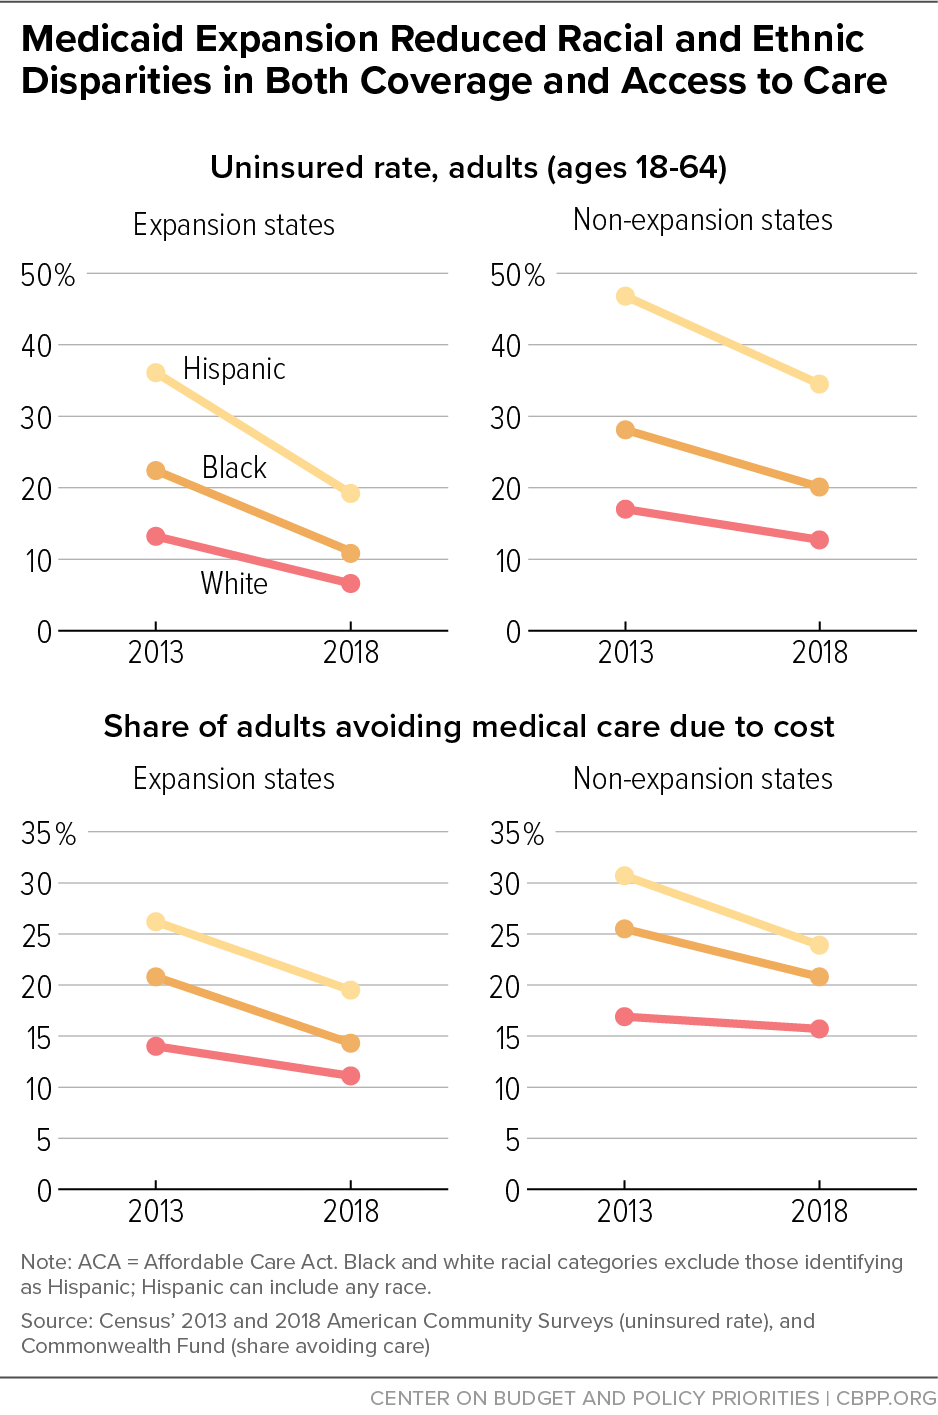 Medicaid Expansion Reduced Racial and Ethnic Disparities in Both Coverage and Access to Care